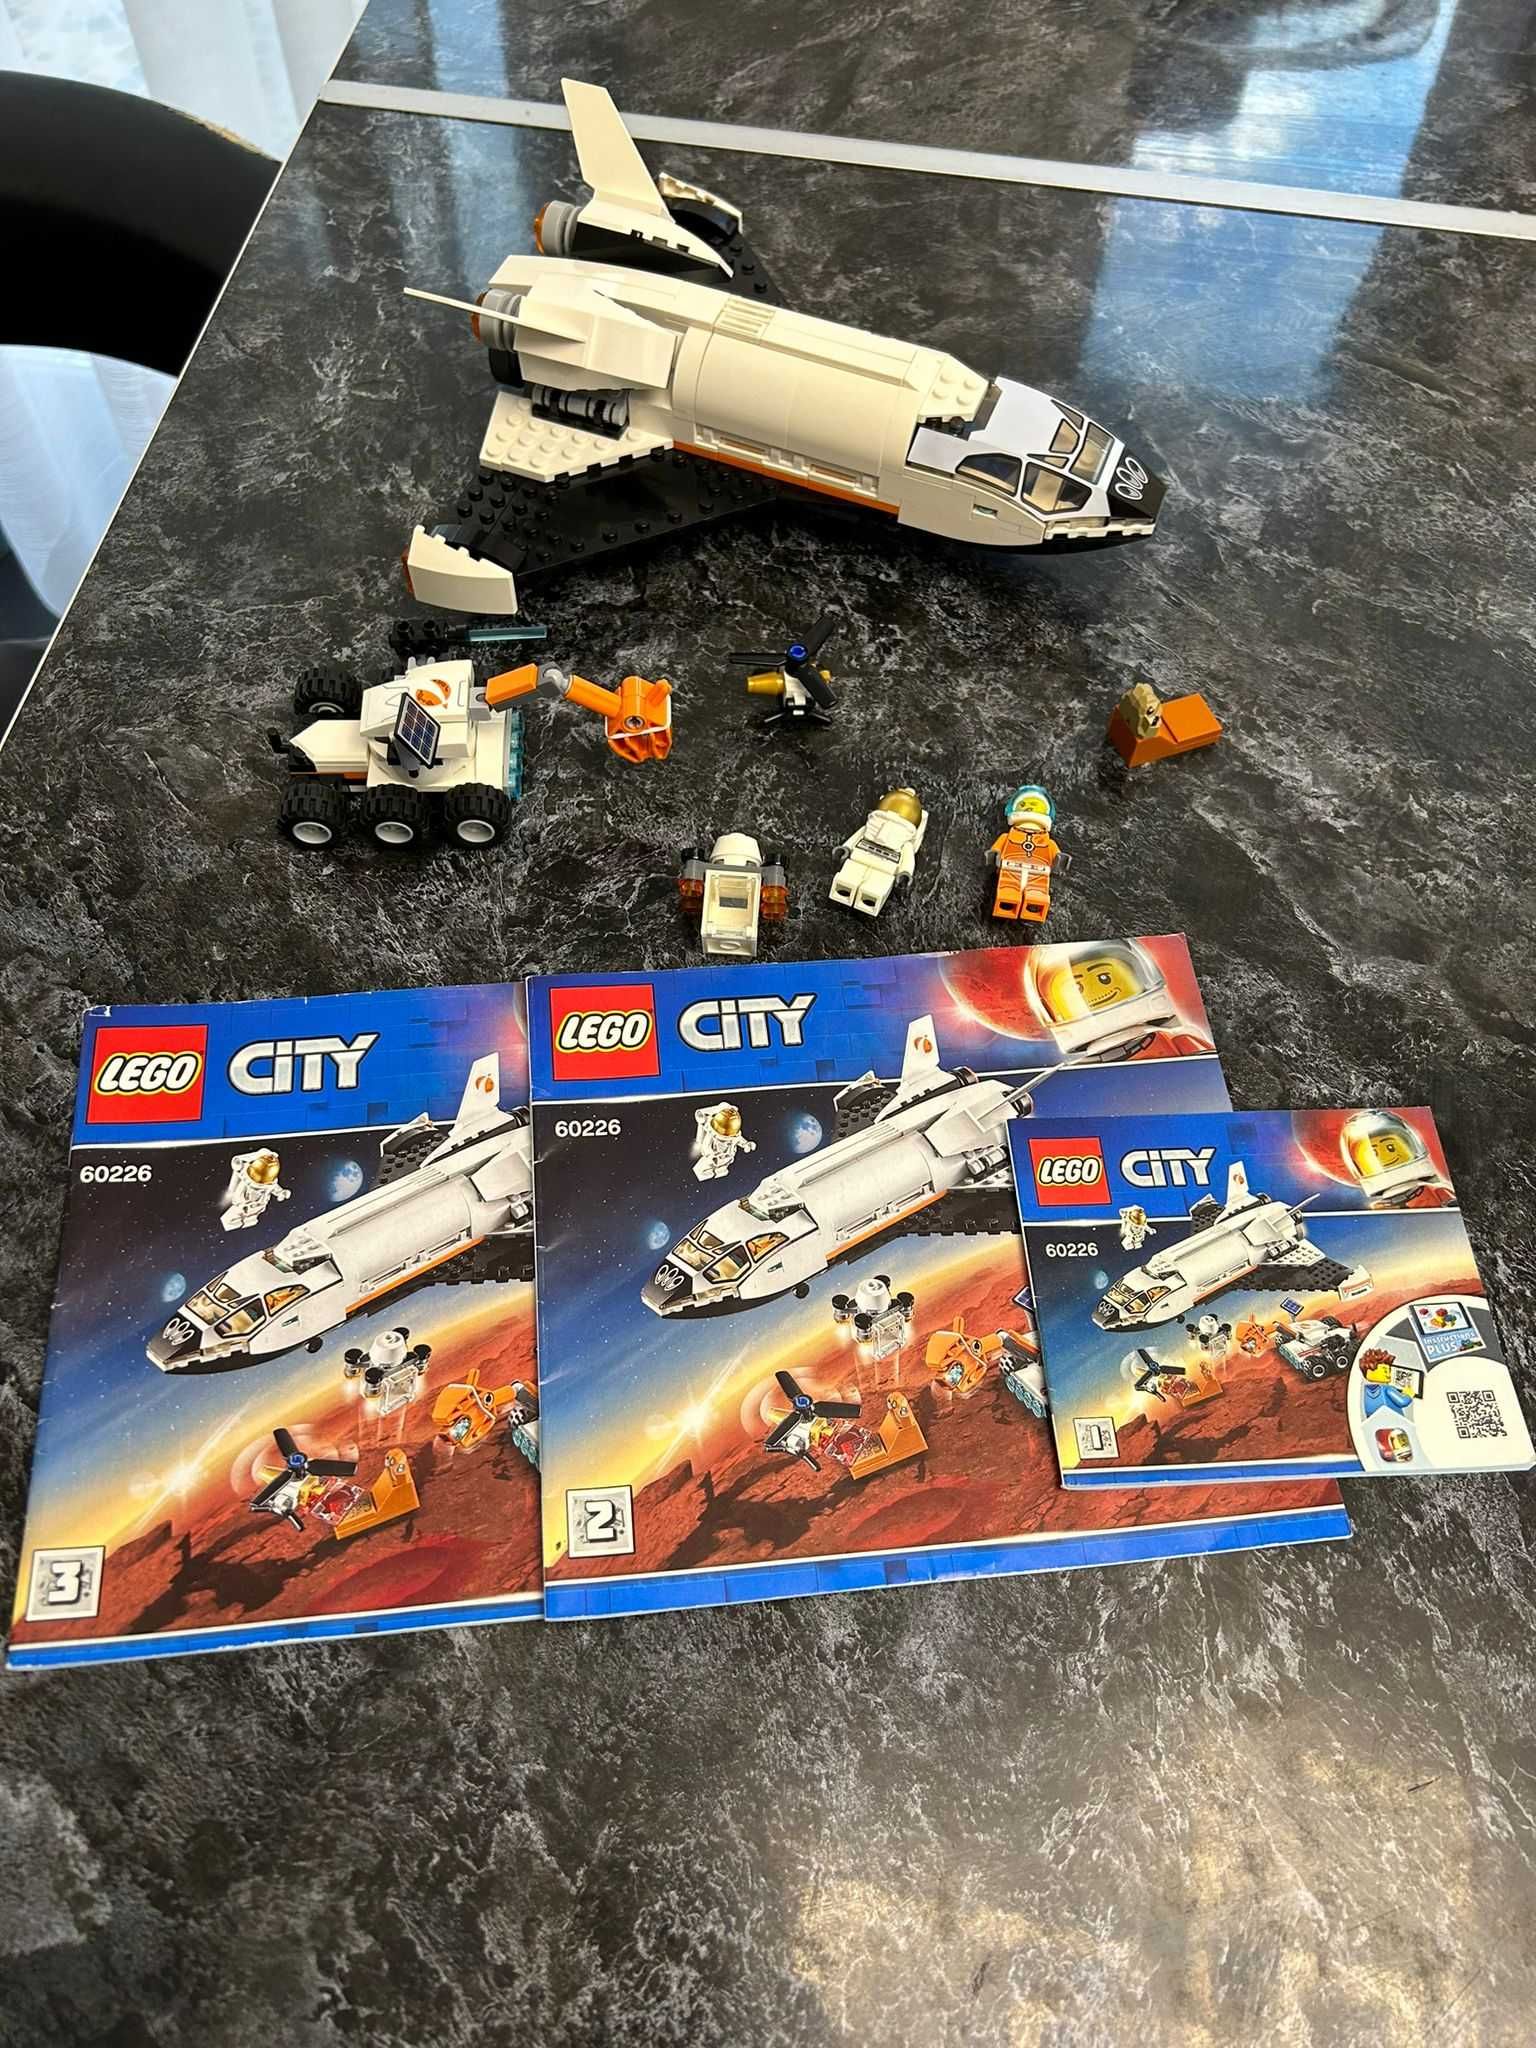 Lego City Mars Research Shuttle, 60226 - 262 piese